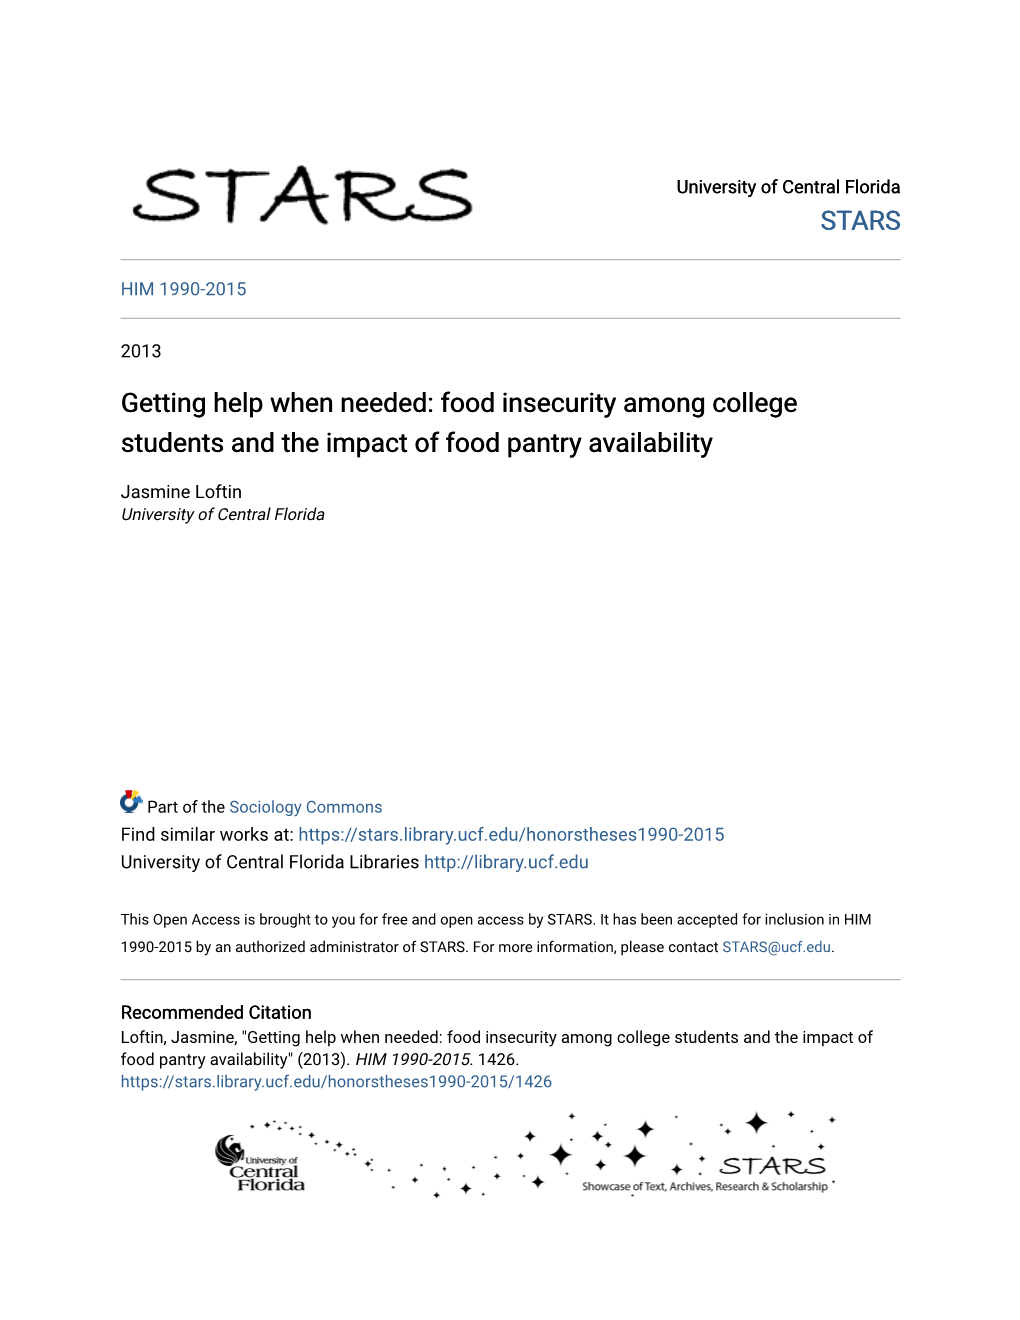 Getting Help When Needed: Food Insecurity Among College Students and the Impact of Food Pantry Availability